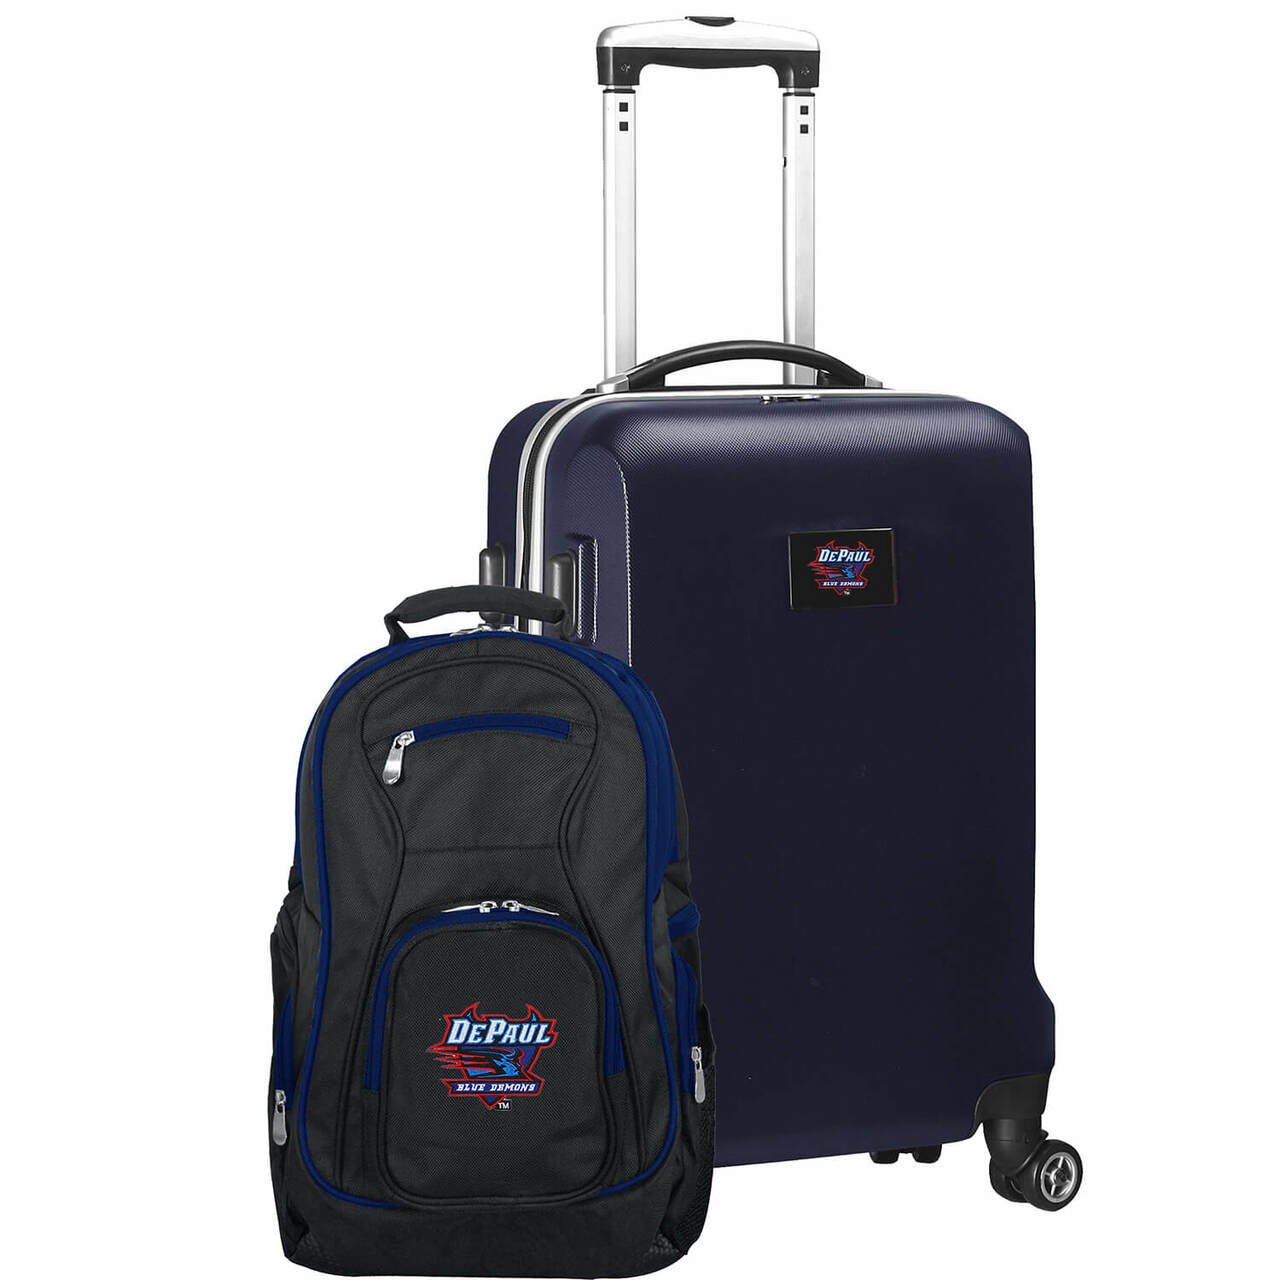 Depaul Deluxe 2-Piece Backpack and Carry-on Set in Navy